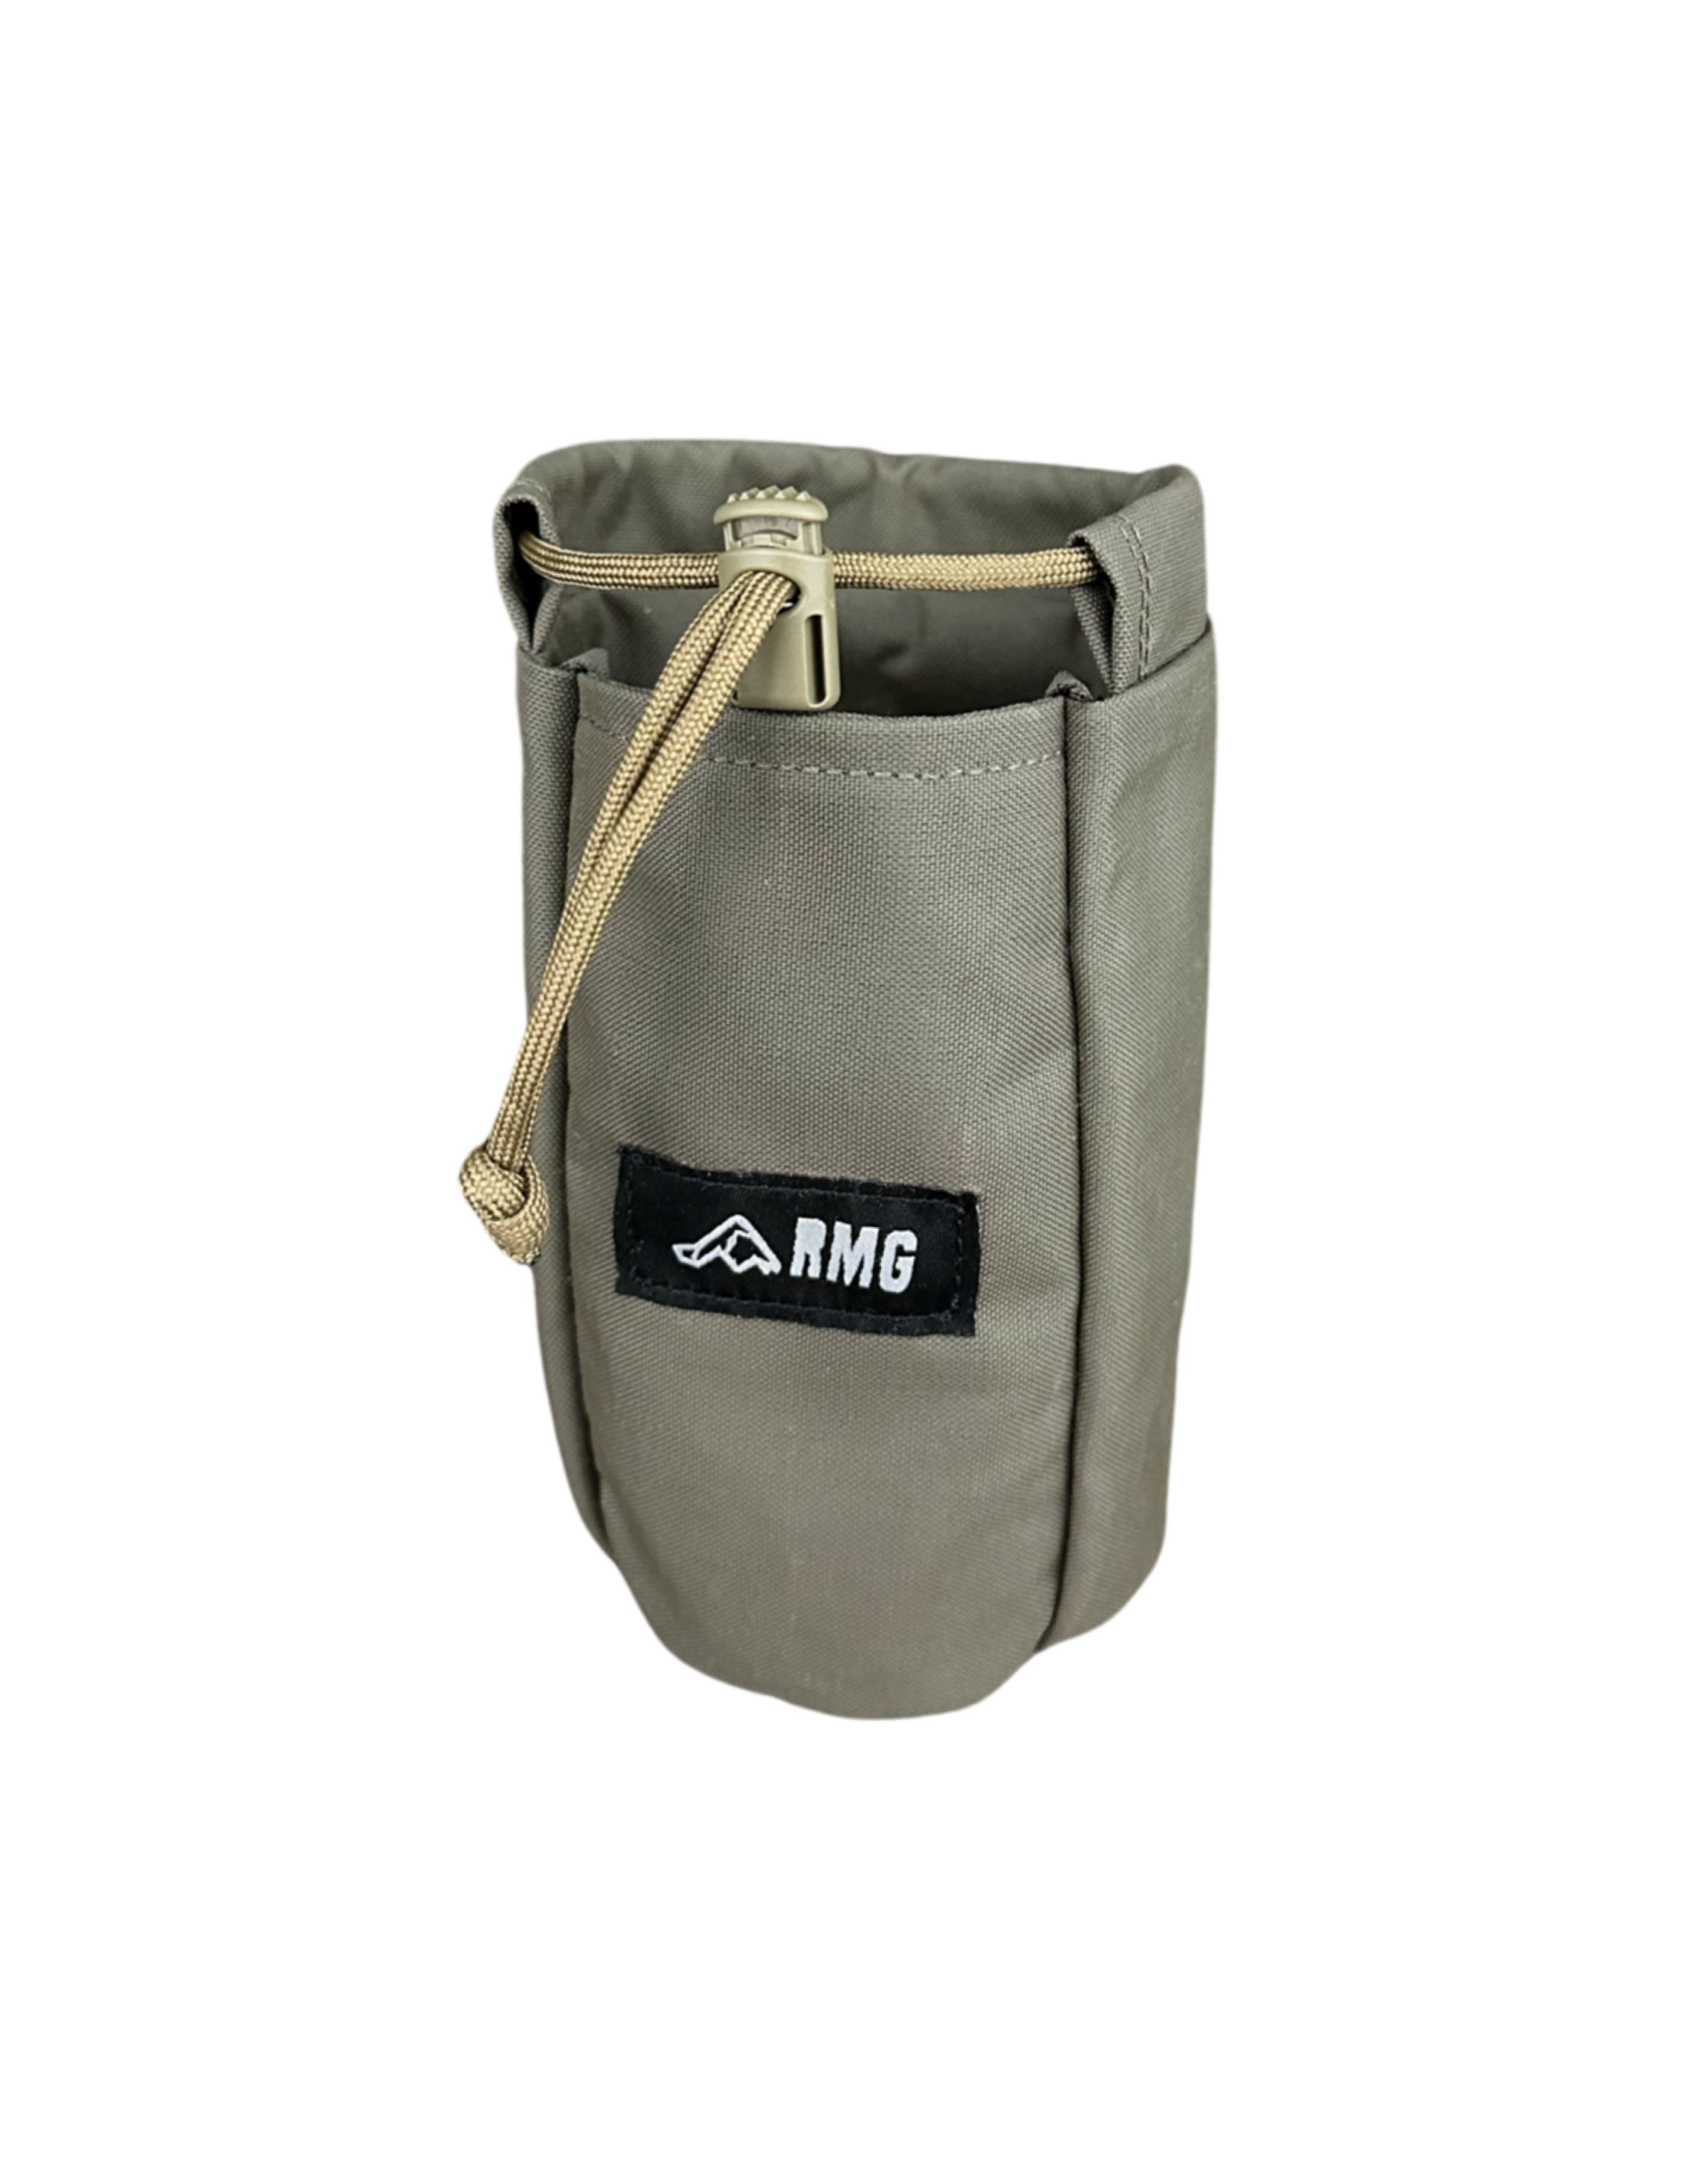 Helikon-Tex WATER CANTEEN Molle Pouch Pocket Cordura Tactical